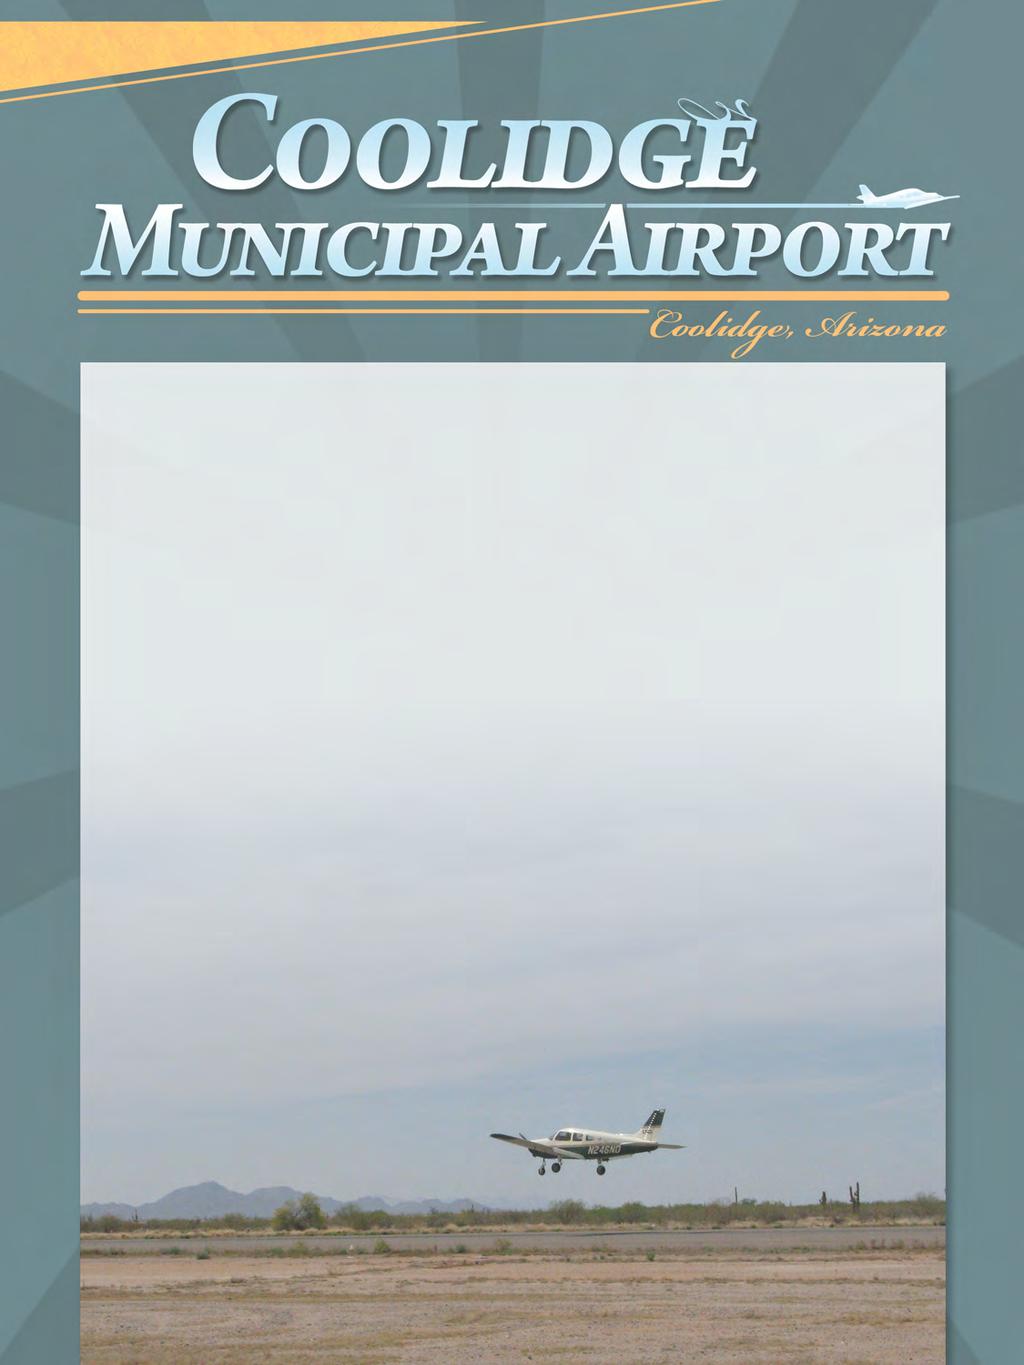 chapter 5 Recommended Master Plan Concept airport master plan The planning process for Coolidge Municipal Airport has included several analytical efforts in the previous chapters intended to project